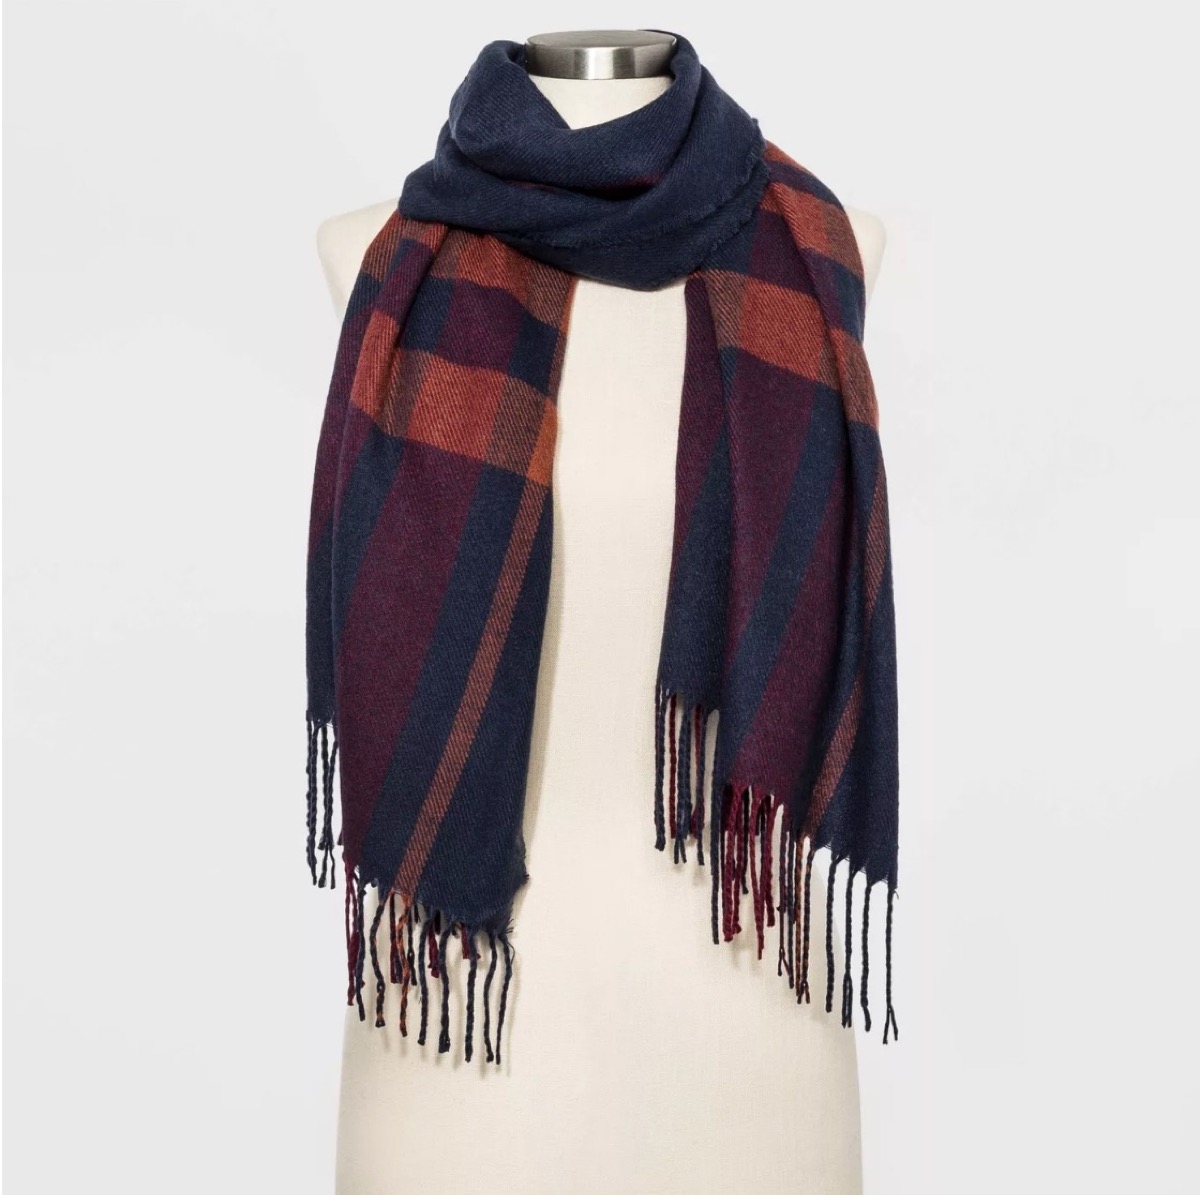 blue and brown plaid scarf on headless mannequin